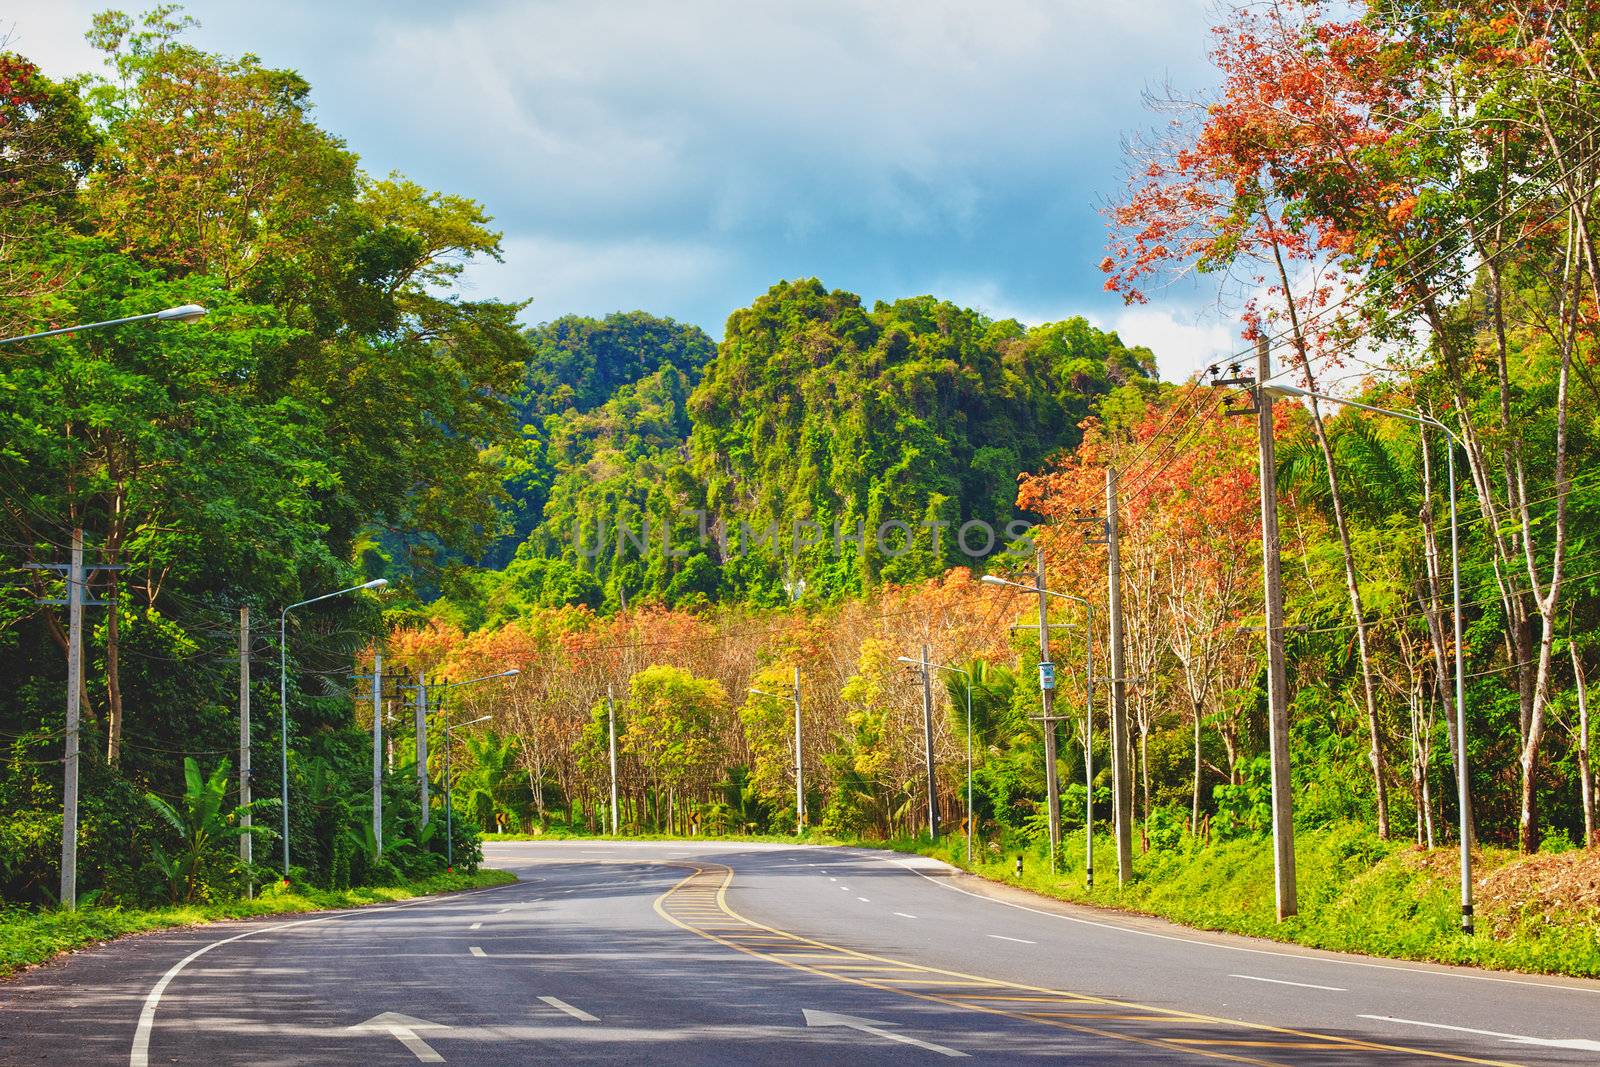 Highway in Thailand by petr_malyshev